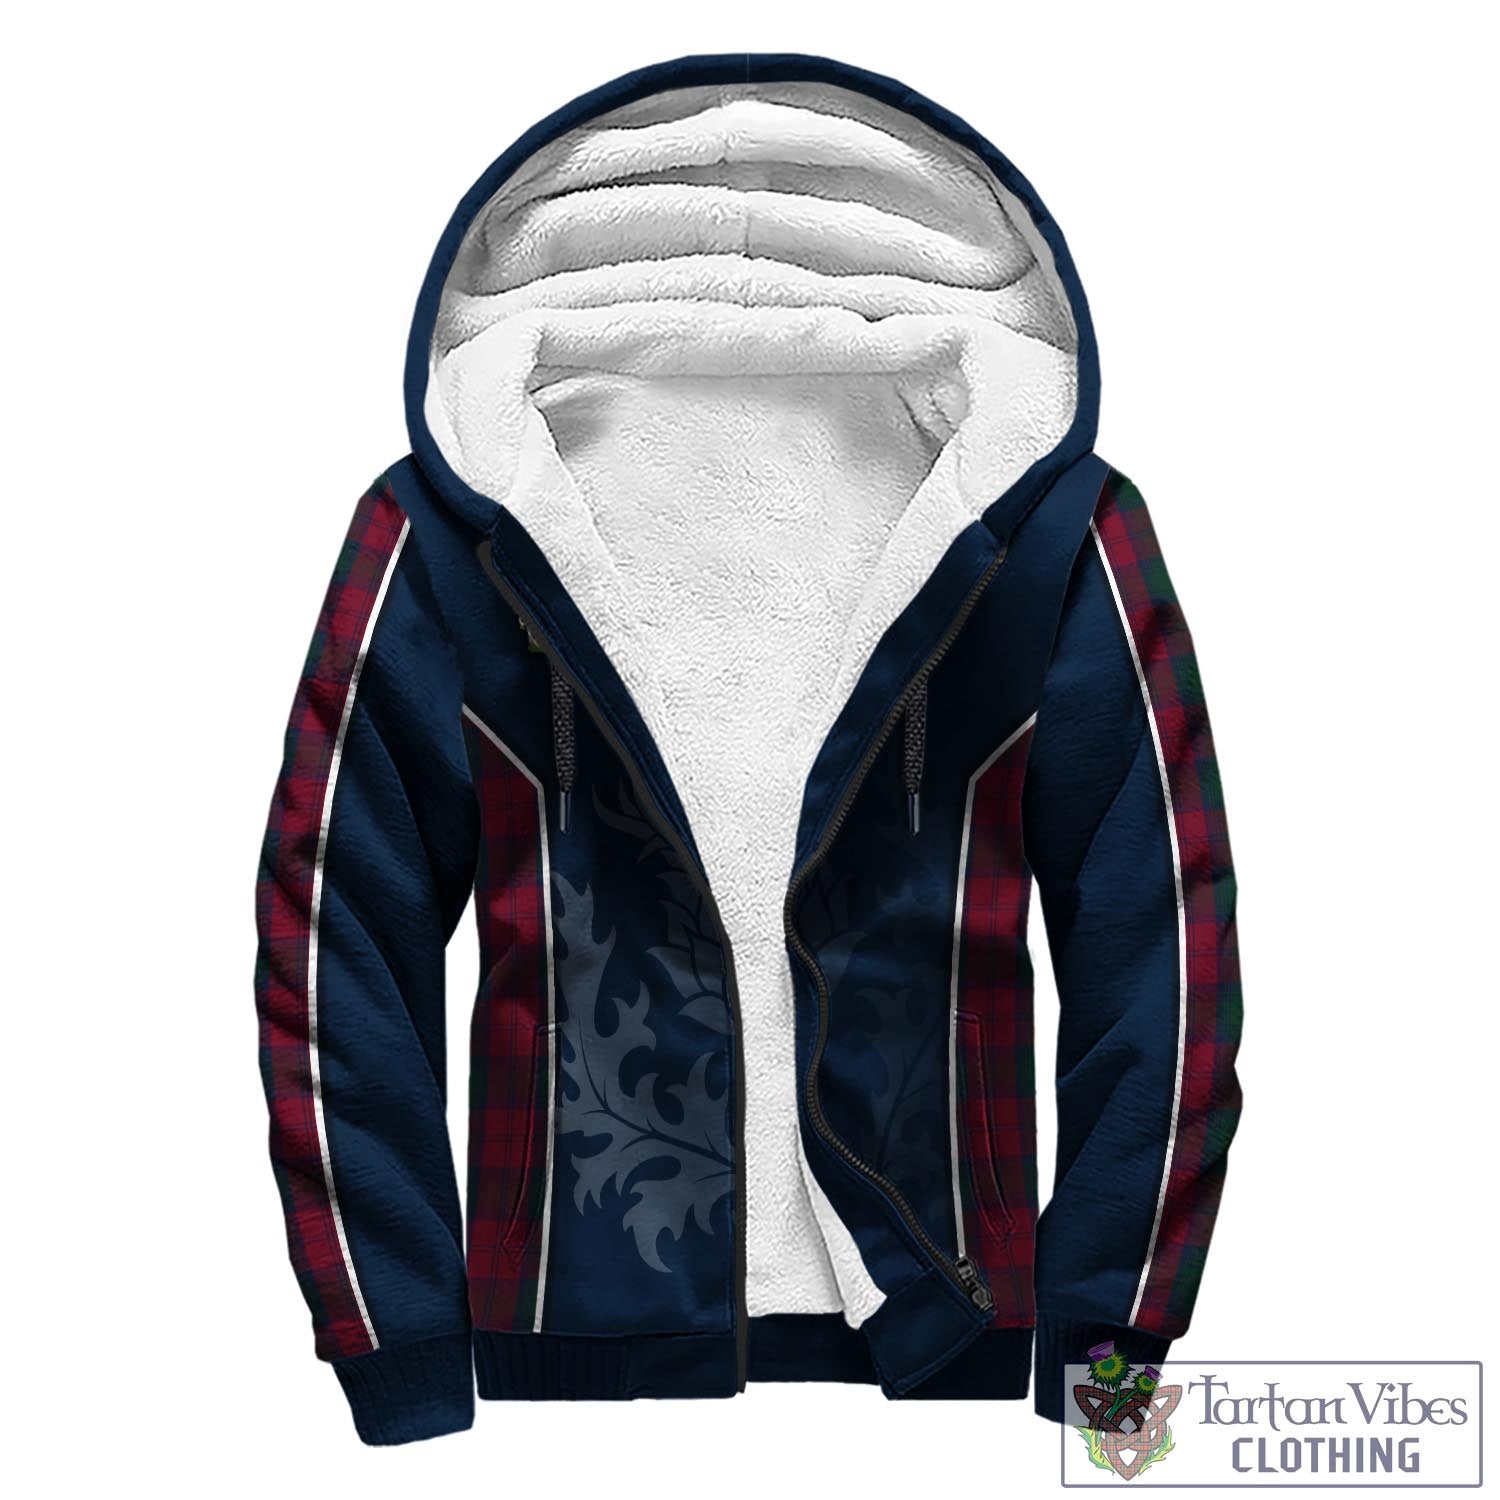 Tartan Vibes Clothing Lindsay Tartan Sherpa Hoodie with Family Crest and Scottish Thistle Vibes Sport Style